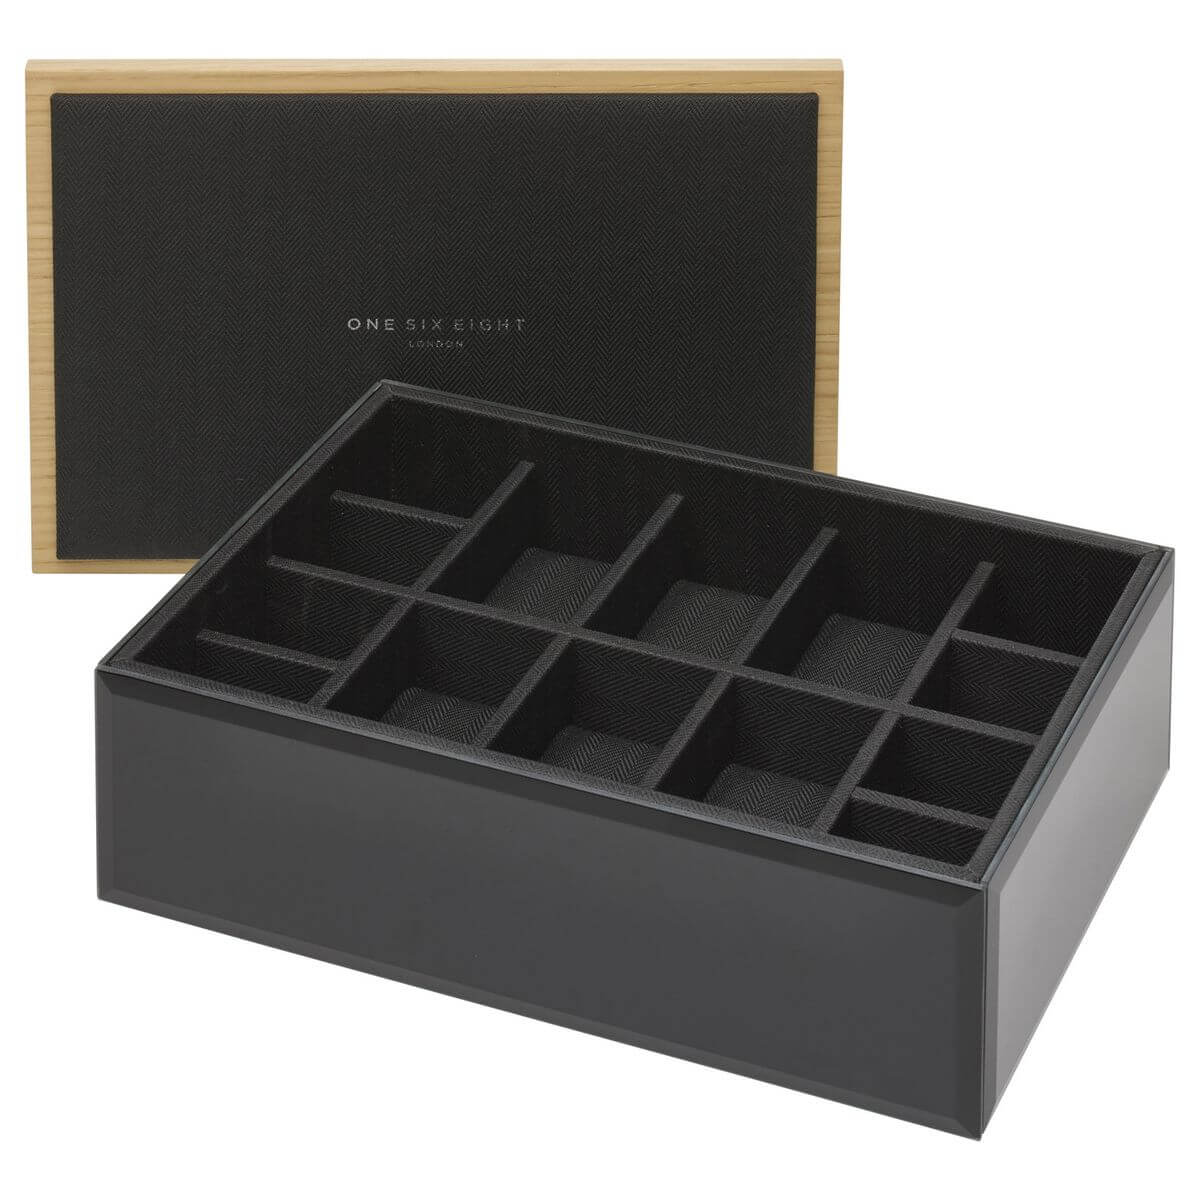 A black glass watch storage box with black herringbone inner lining and wooden lid